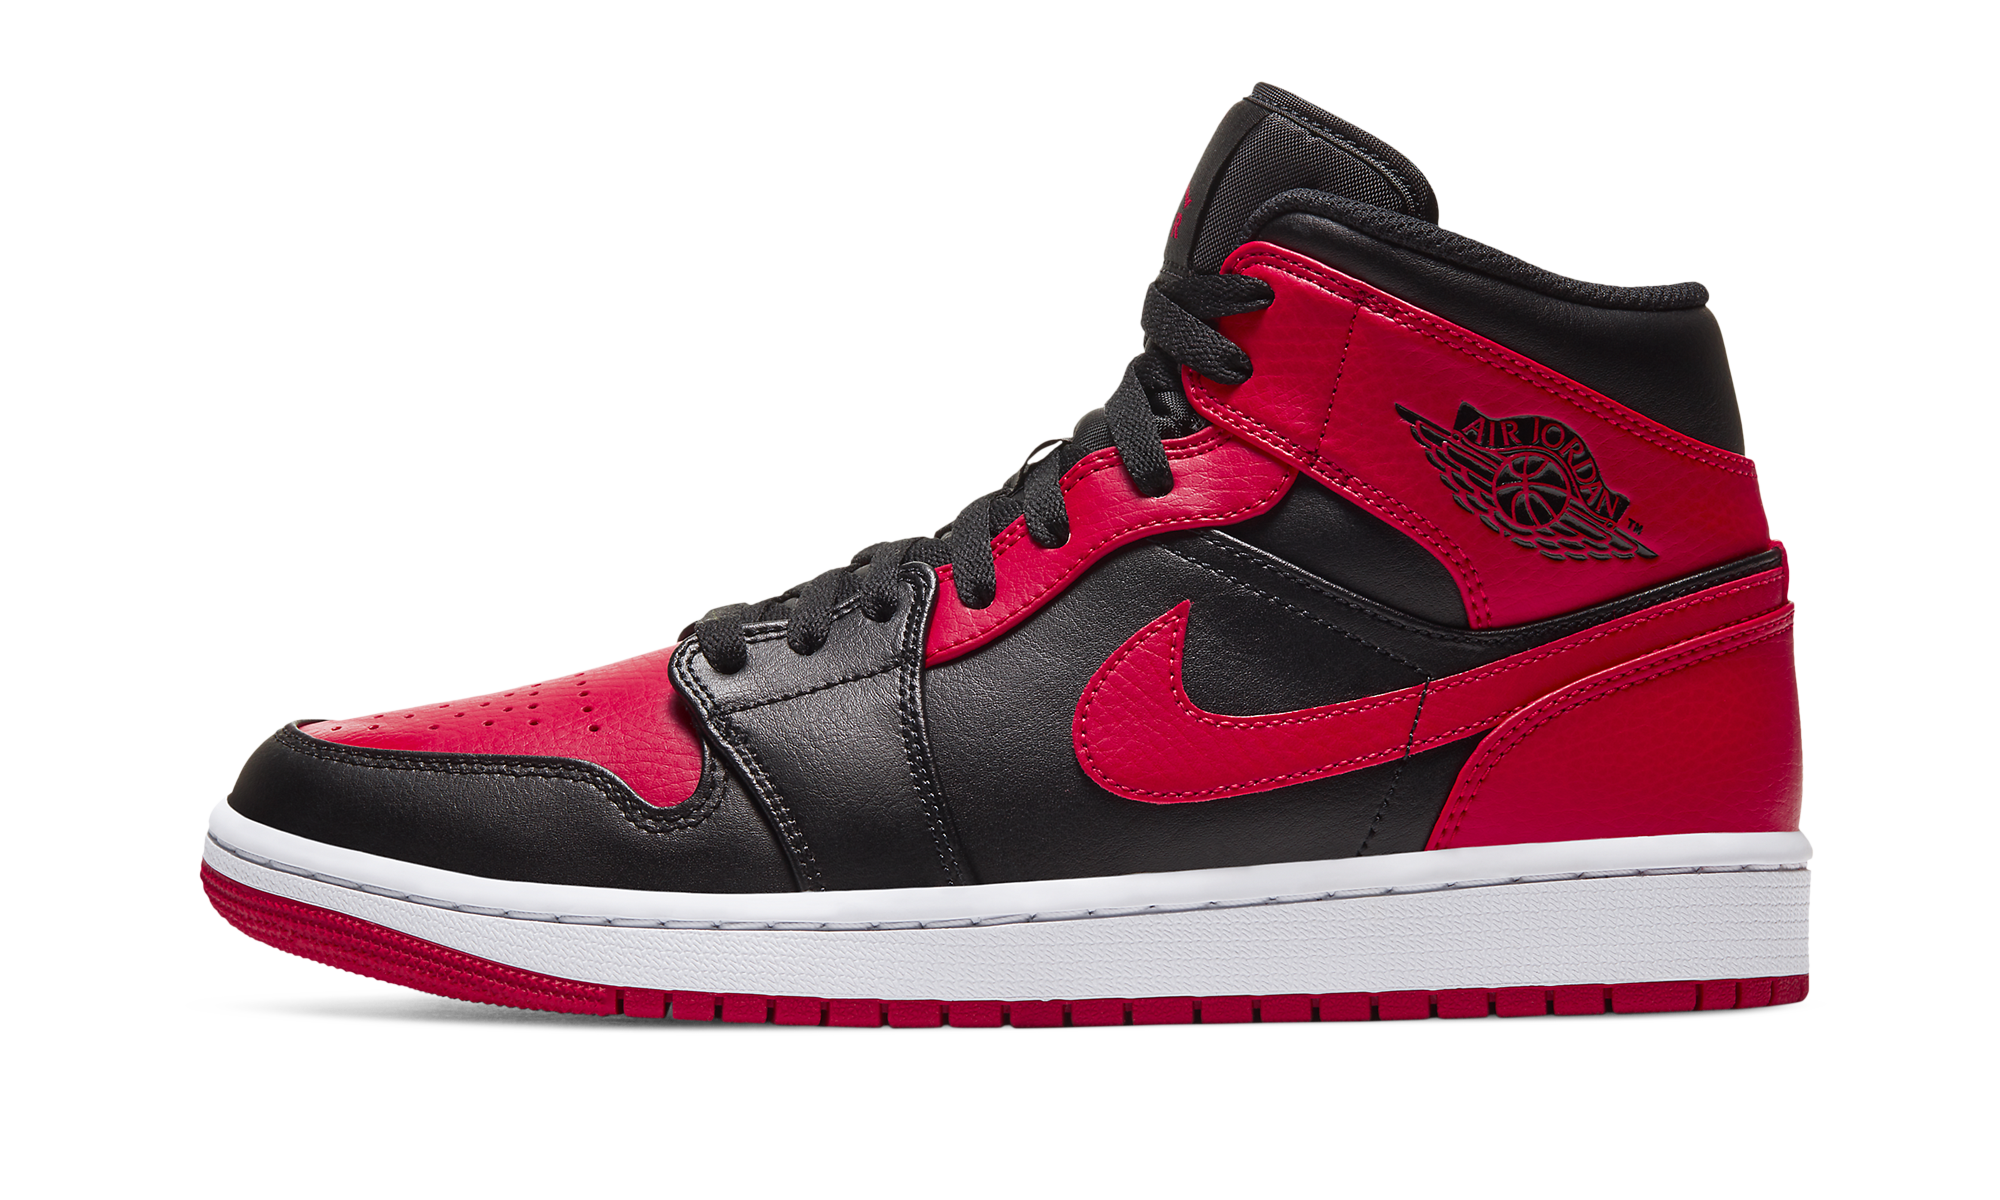 Air Jordan 1 Mid Banned 2020 - True to Sole